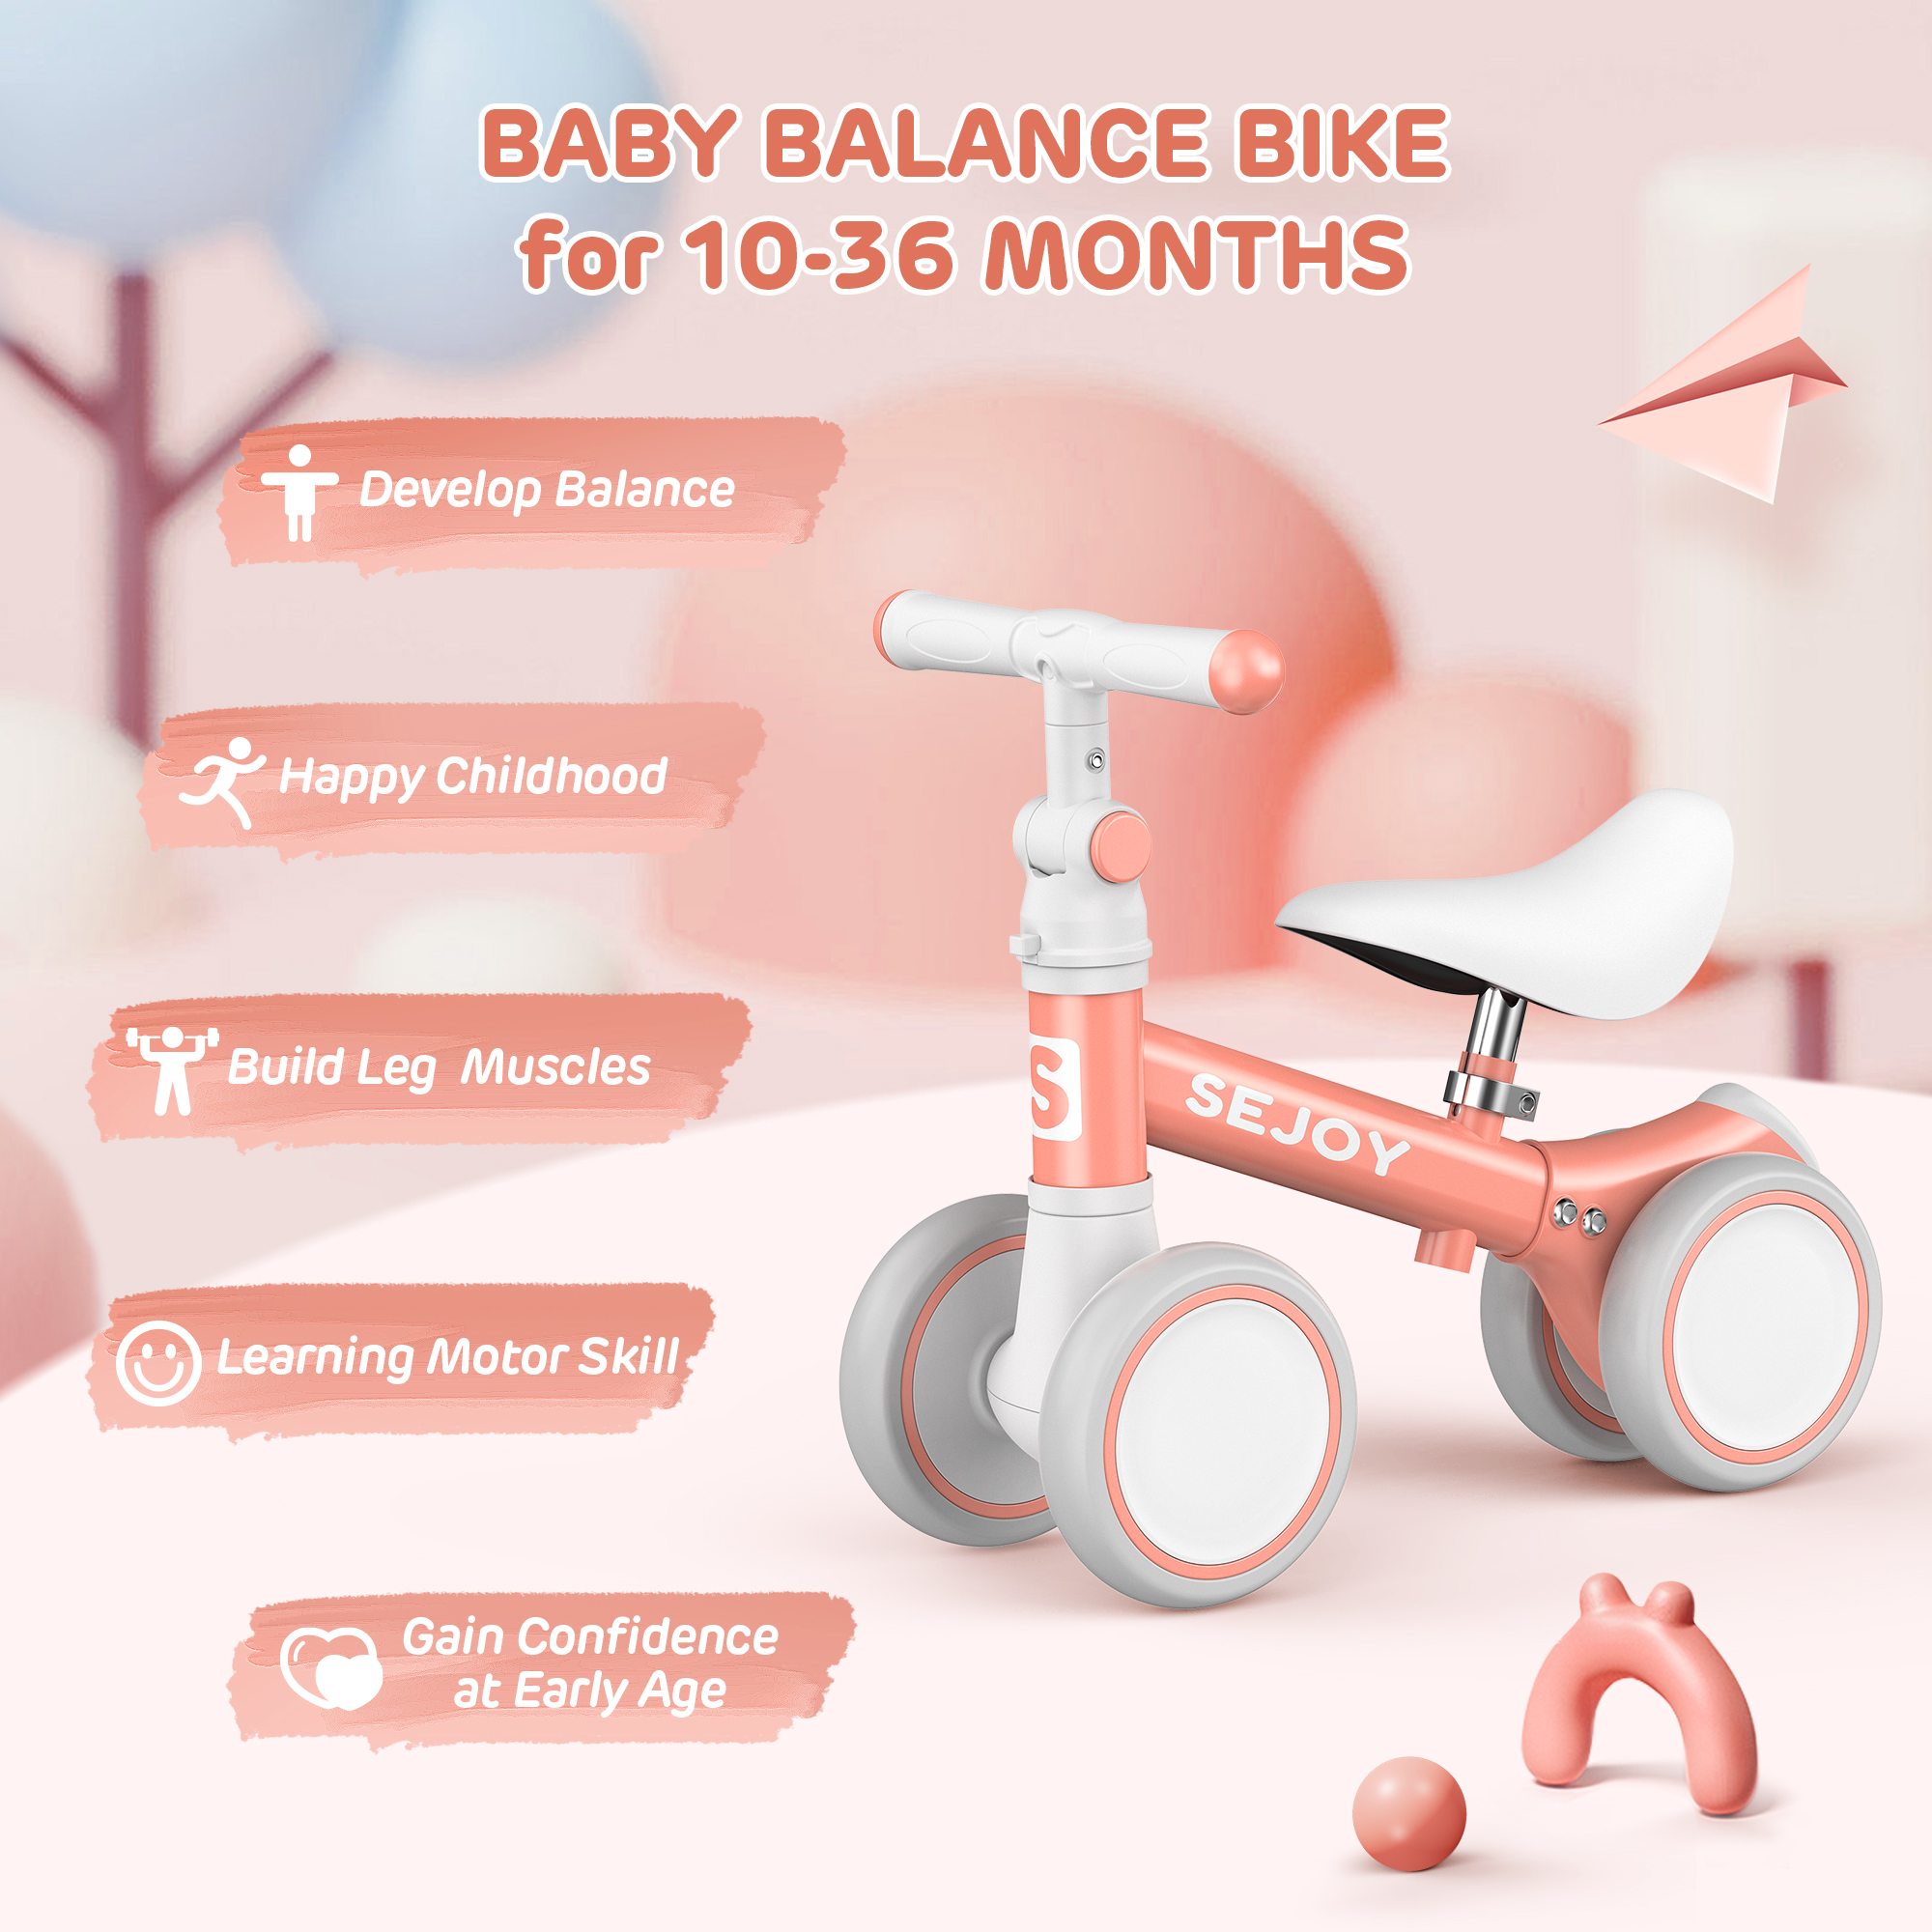 Sejoy Baby Balance Bike, Toddler Baby Bicycle with 4 Wheels for 10-36 Months, Adjustable Handlebar Baby Outdoor Bike Riding Toy, First B-day Gift - image 2 of 9